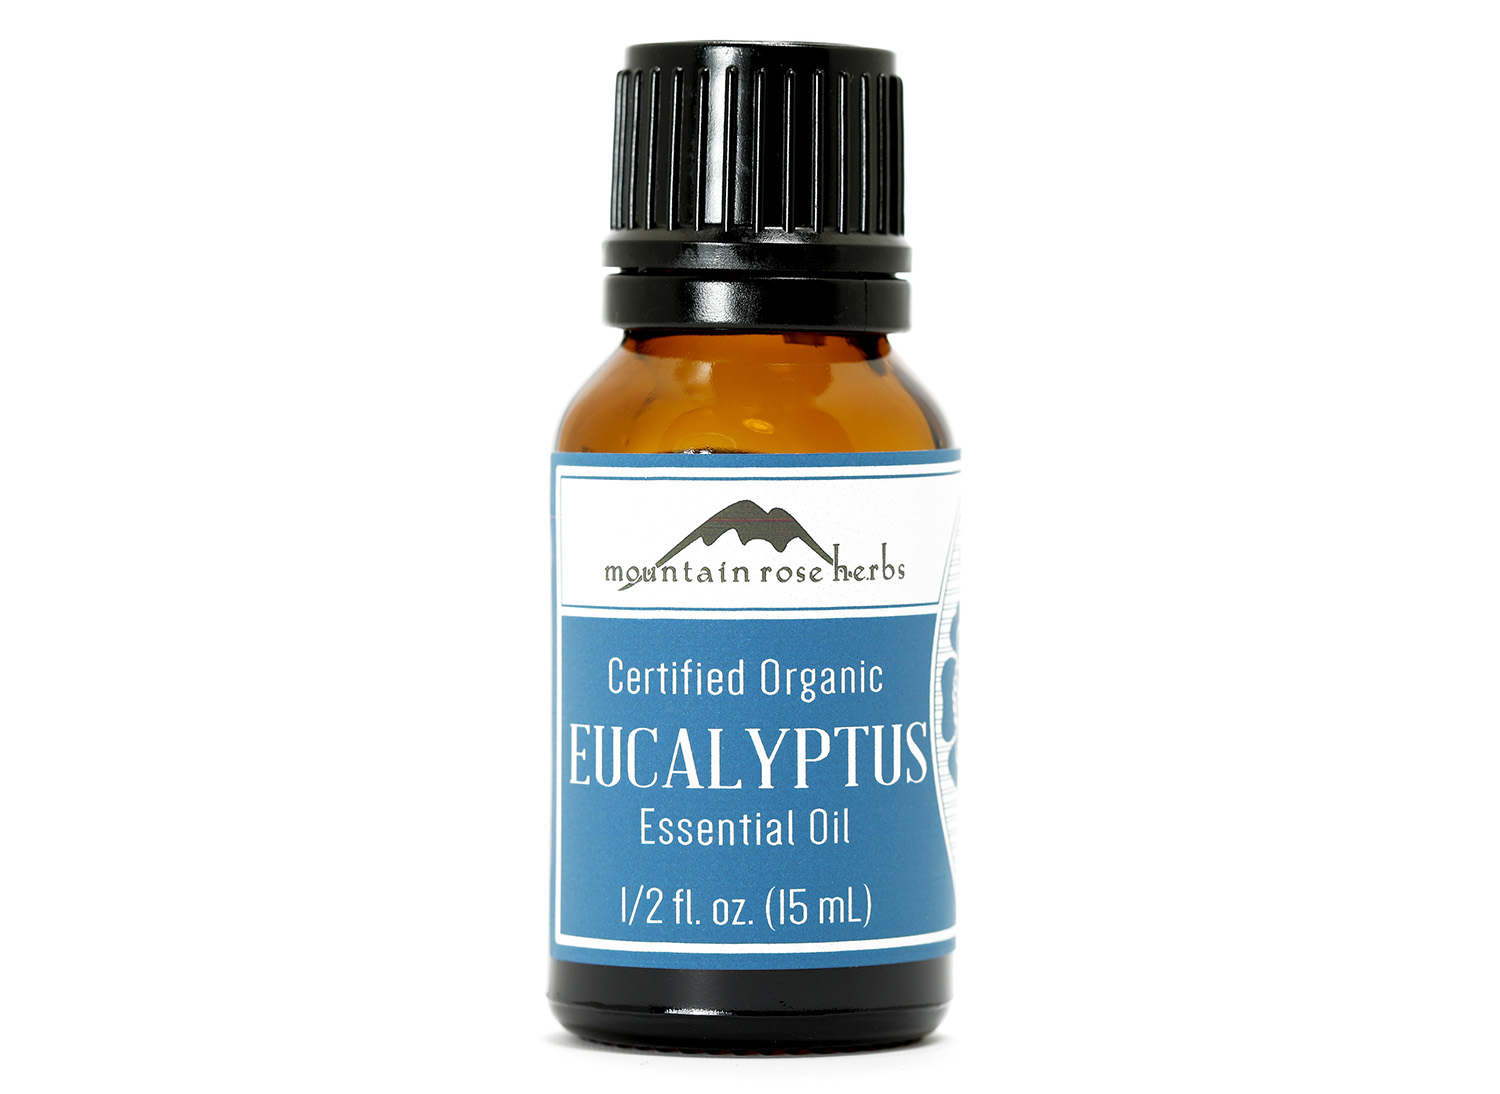 Uplifting Essential Oils For Your Home And Health